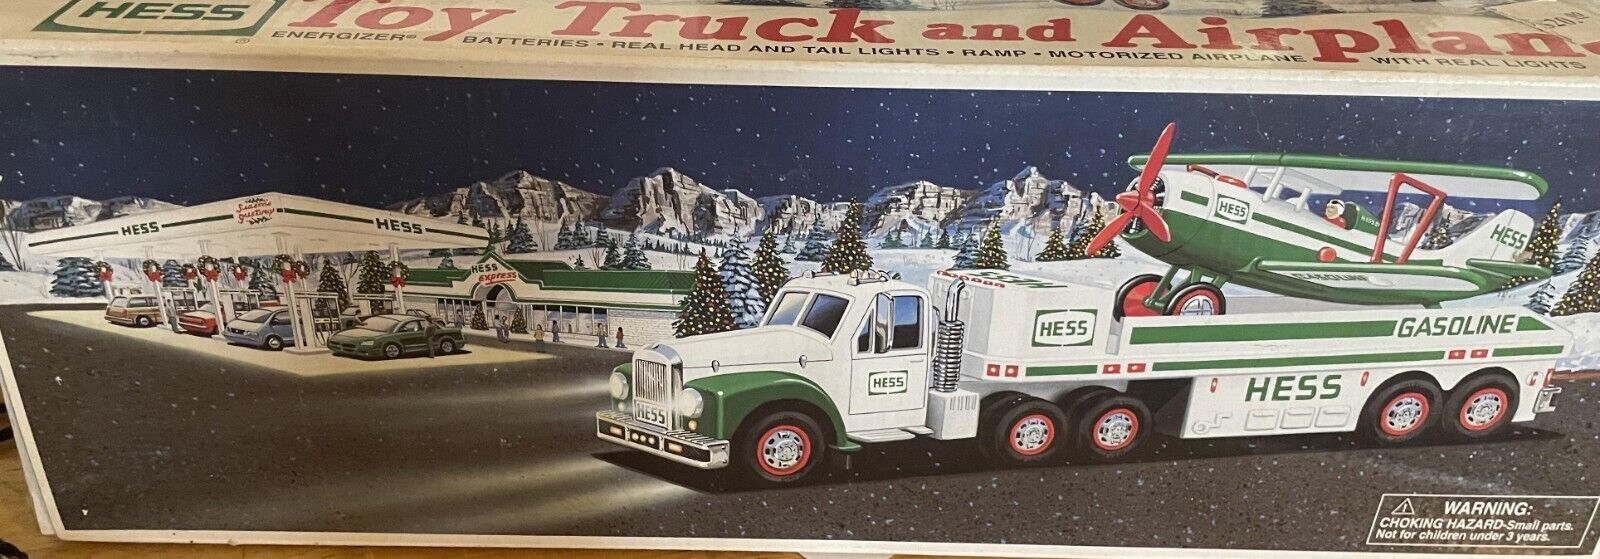 hess trucks collection